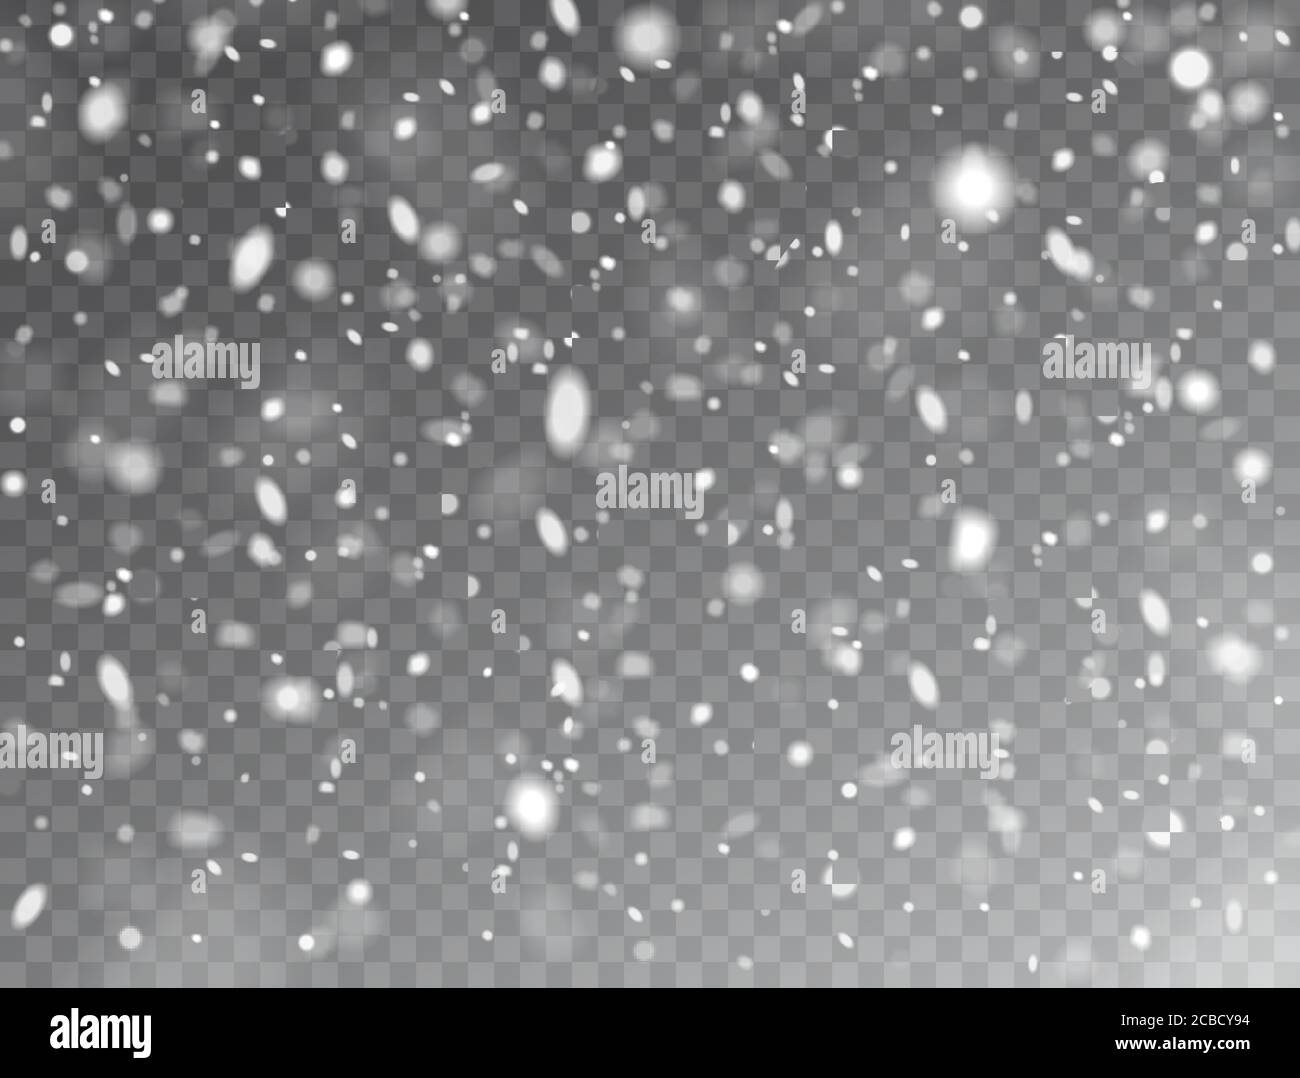 Realistic falling snow. Snow background. Frost storm, snowfall effect. Christmas background with snow on transparent background. Vector illustration. Stock Vector